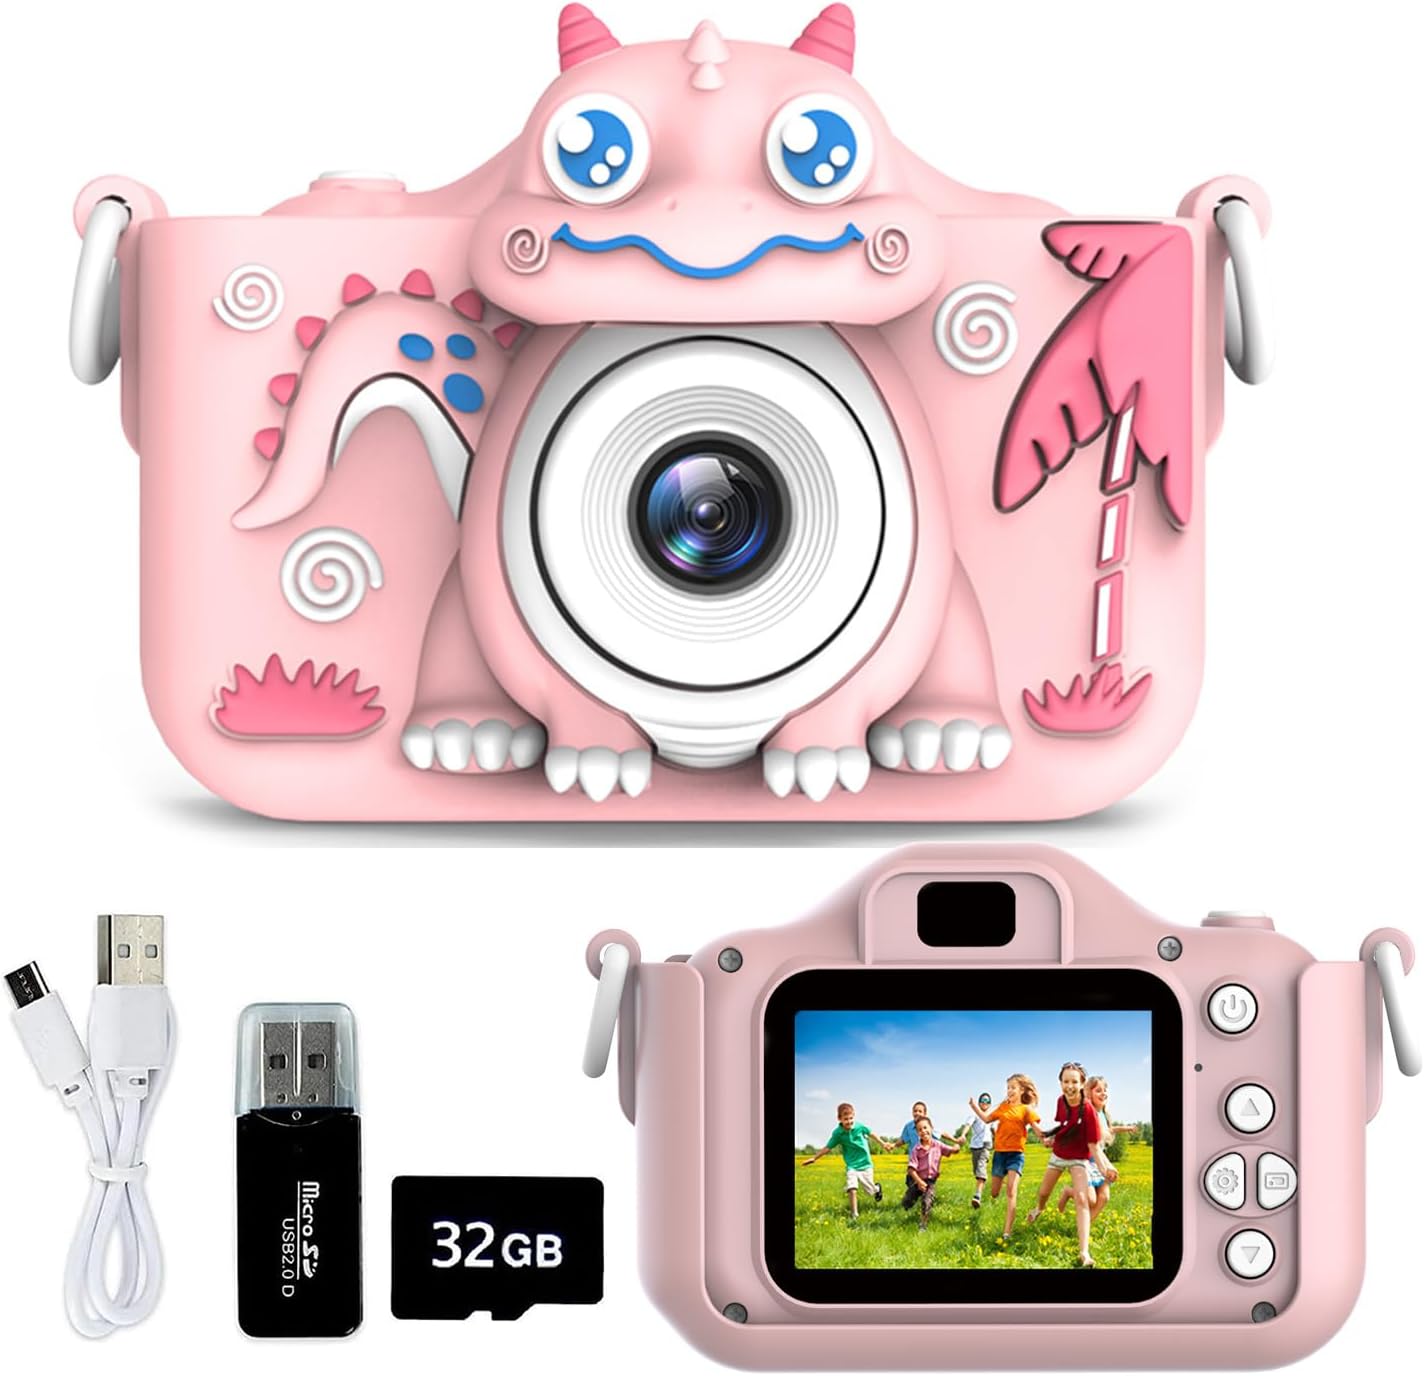 Kids Camera for Girls Age 3-12, Dual Lens Selfie Toddler Camera, 1080P HD Digital Video Camera for Kids, Boys Christmas Birthday Gifts Toys Children Kid Selfie Camera with 32GB Card